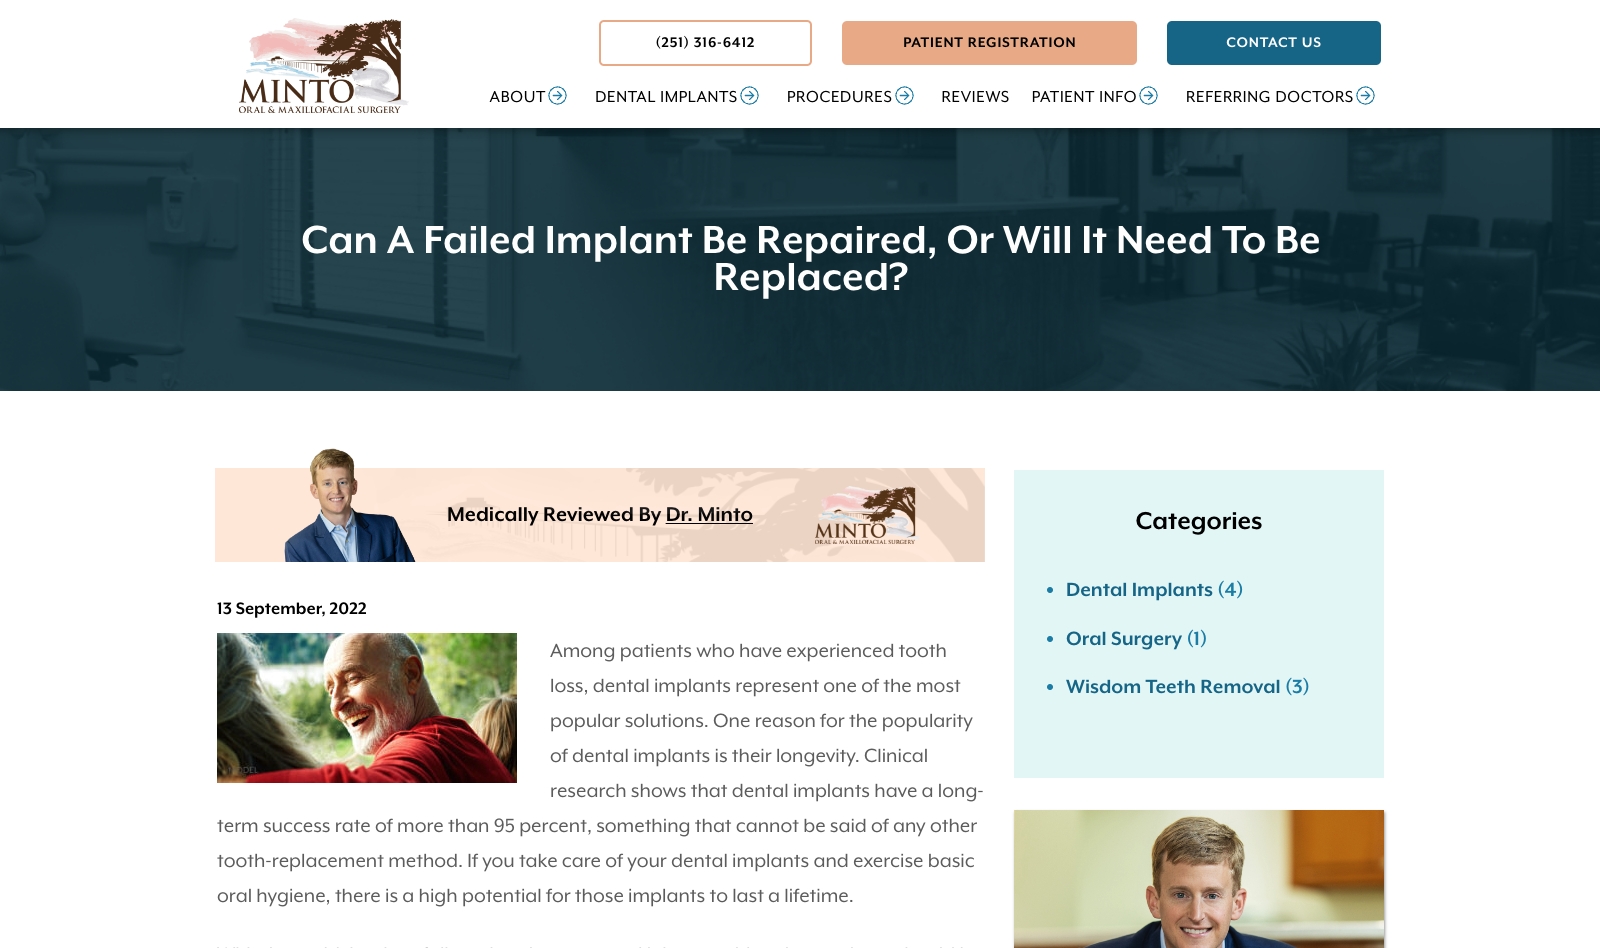 Medically Reviewed By Option 2